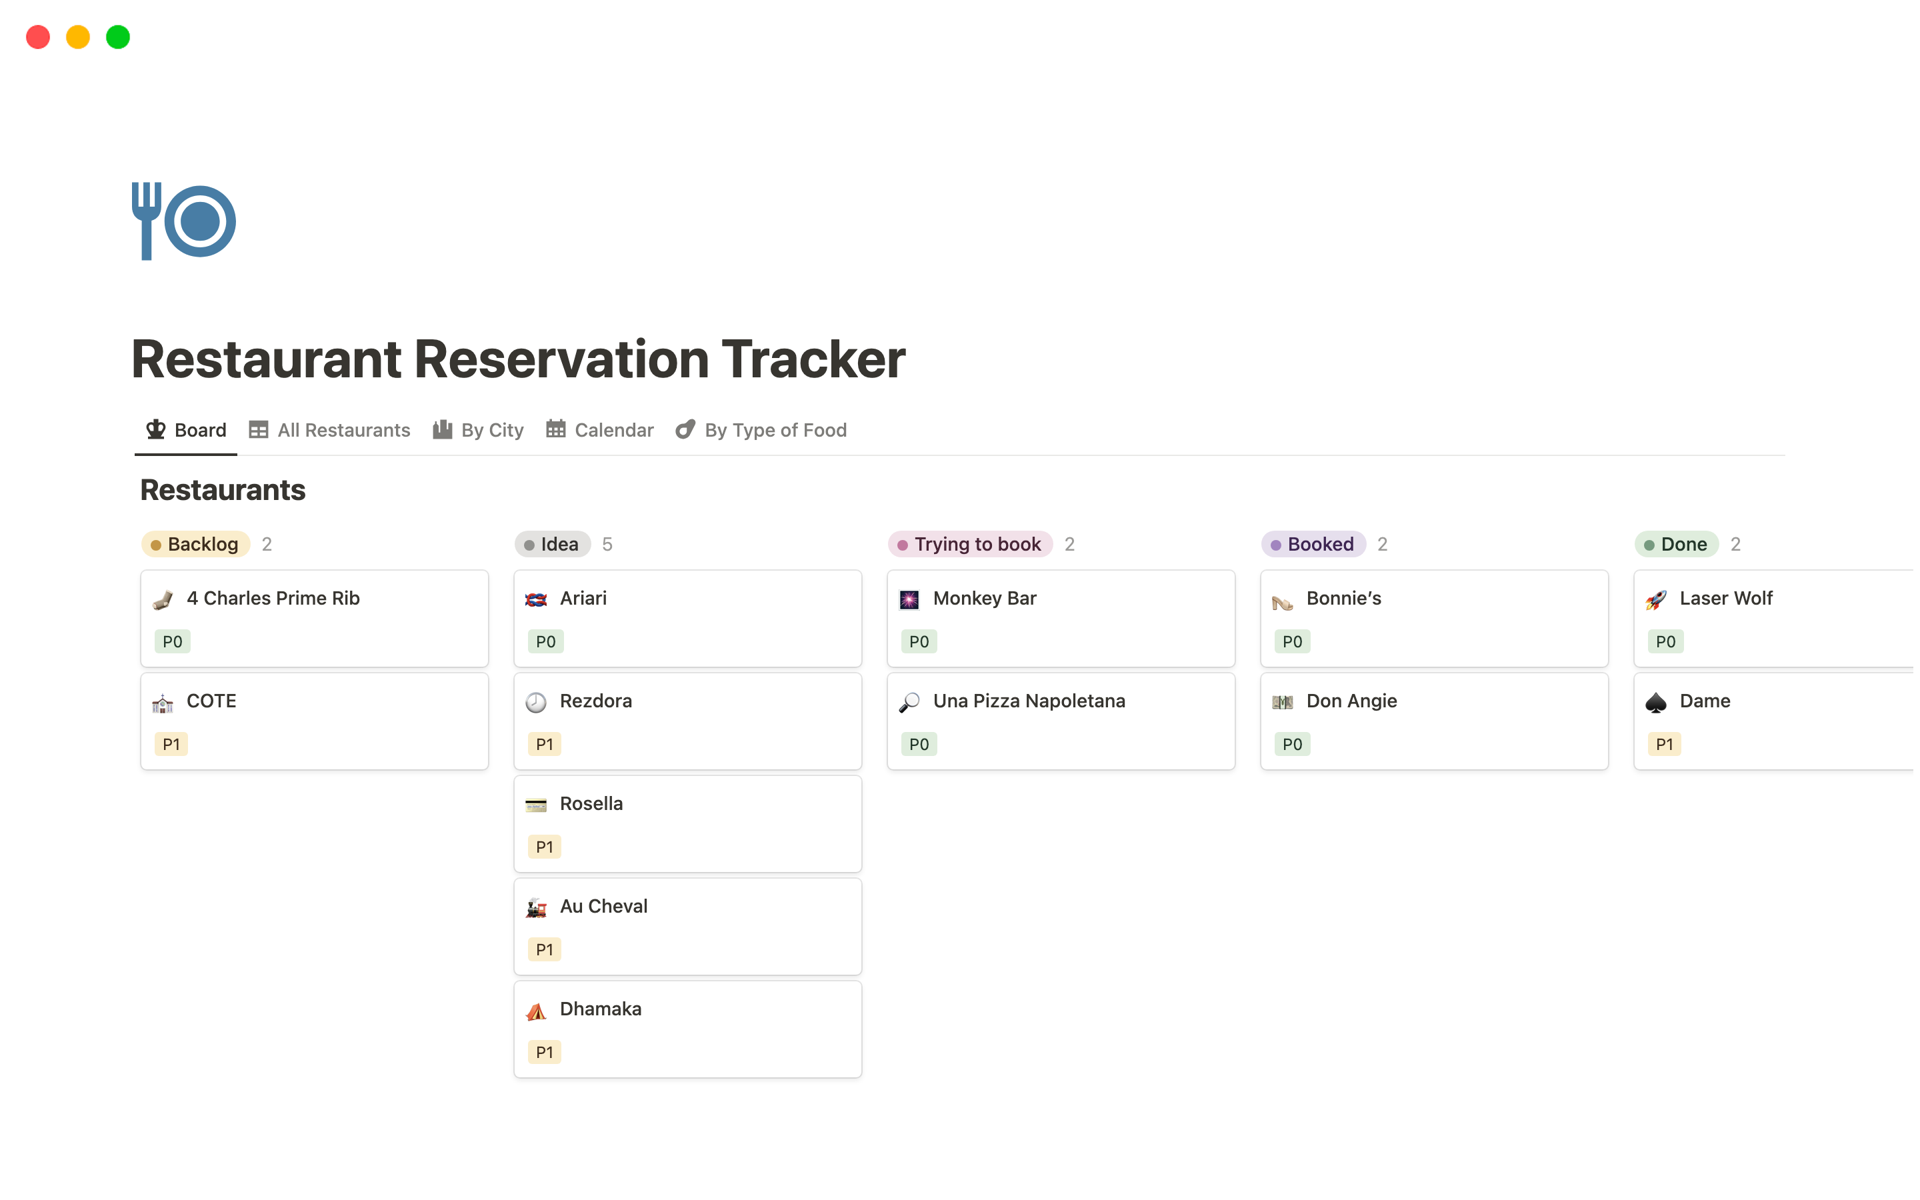 Restaurant reservations can be hard to manage; track everything in Notion!